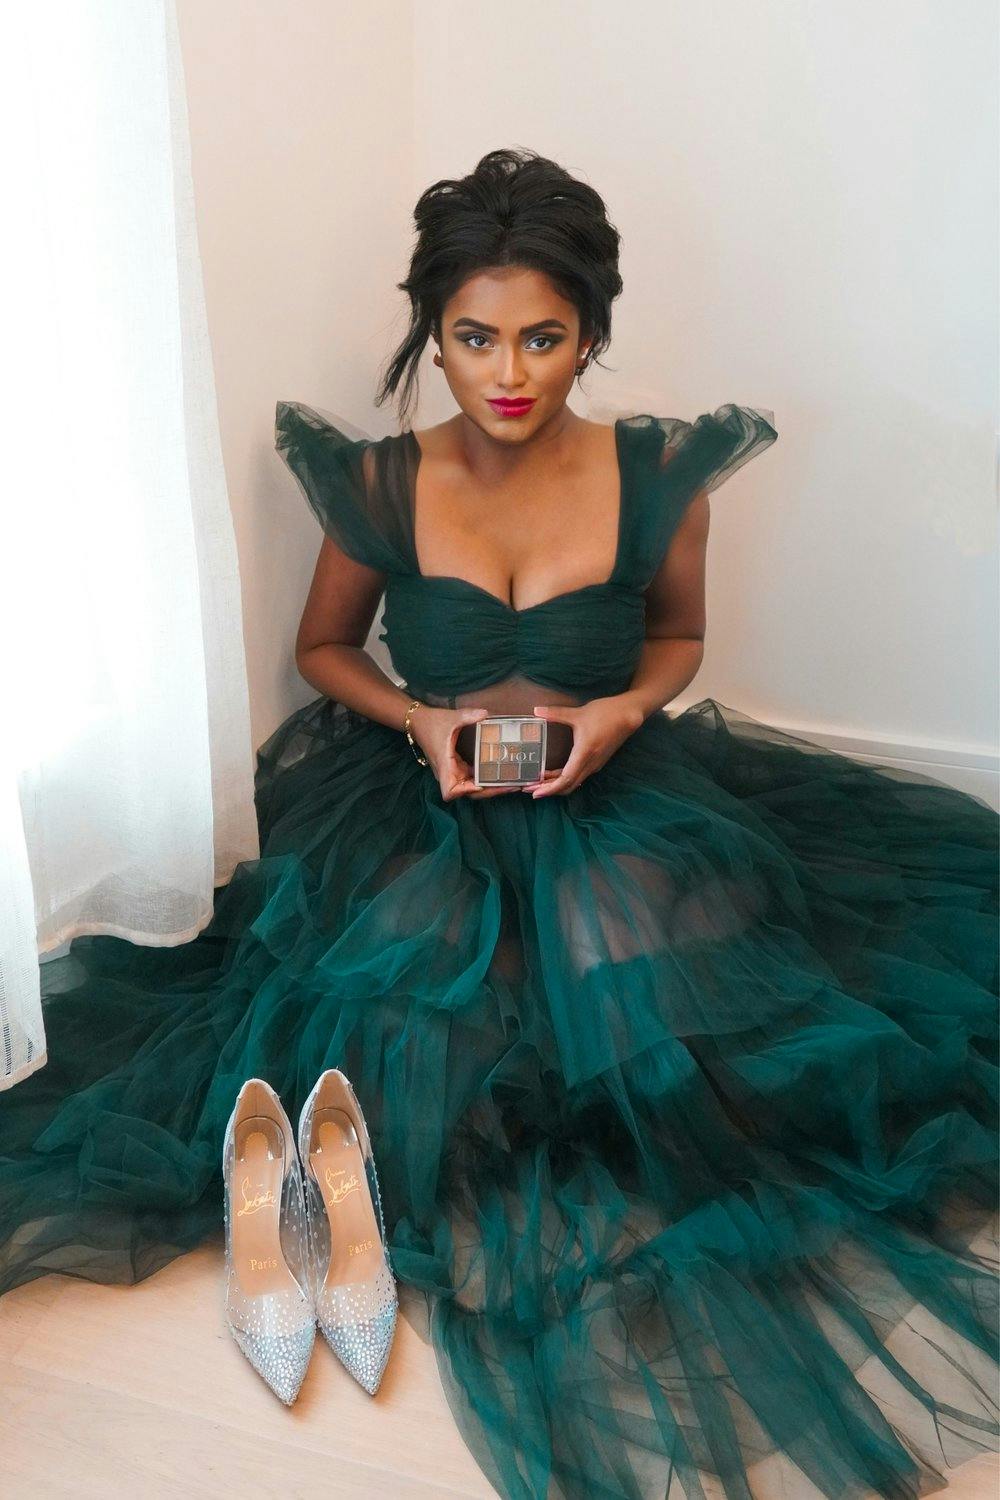 Sachini wearing a Green Tulle Princess Dress with Dior Beauty makeup